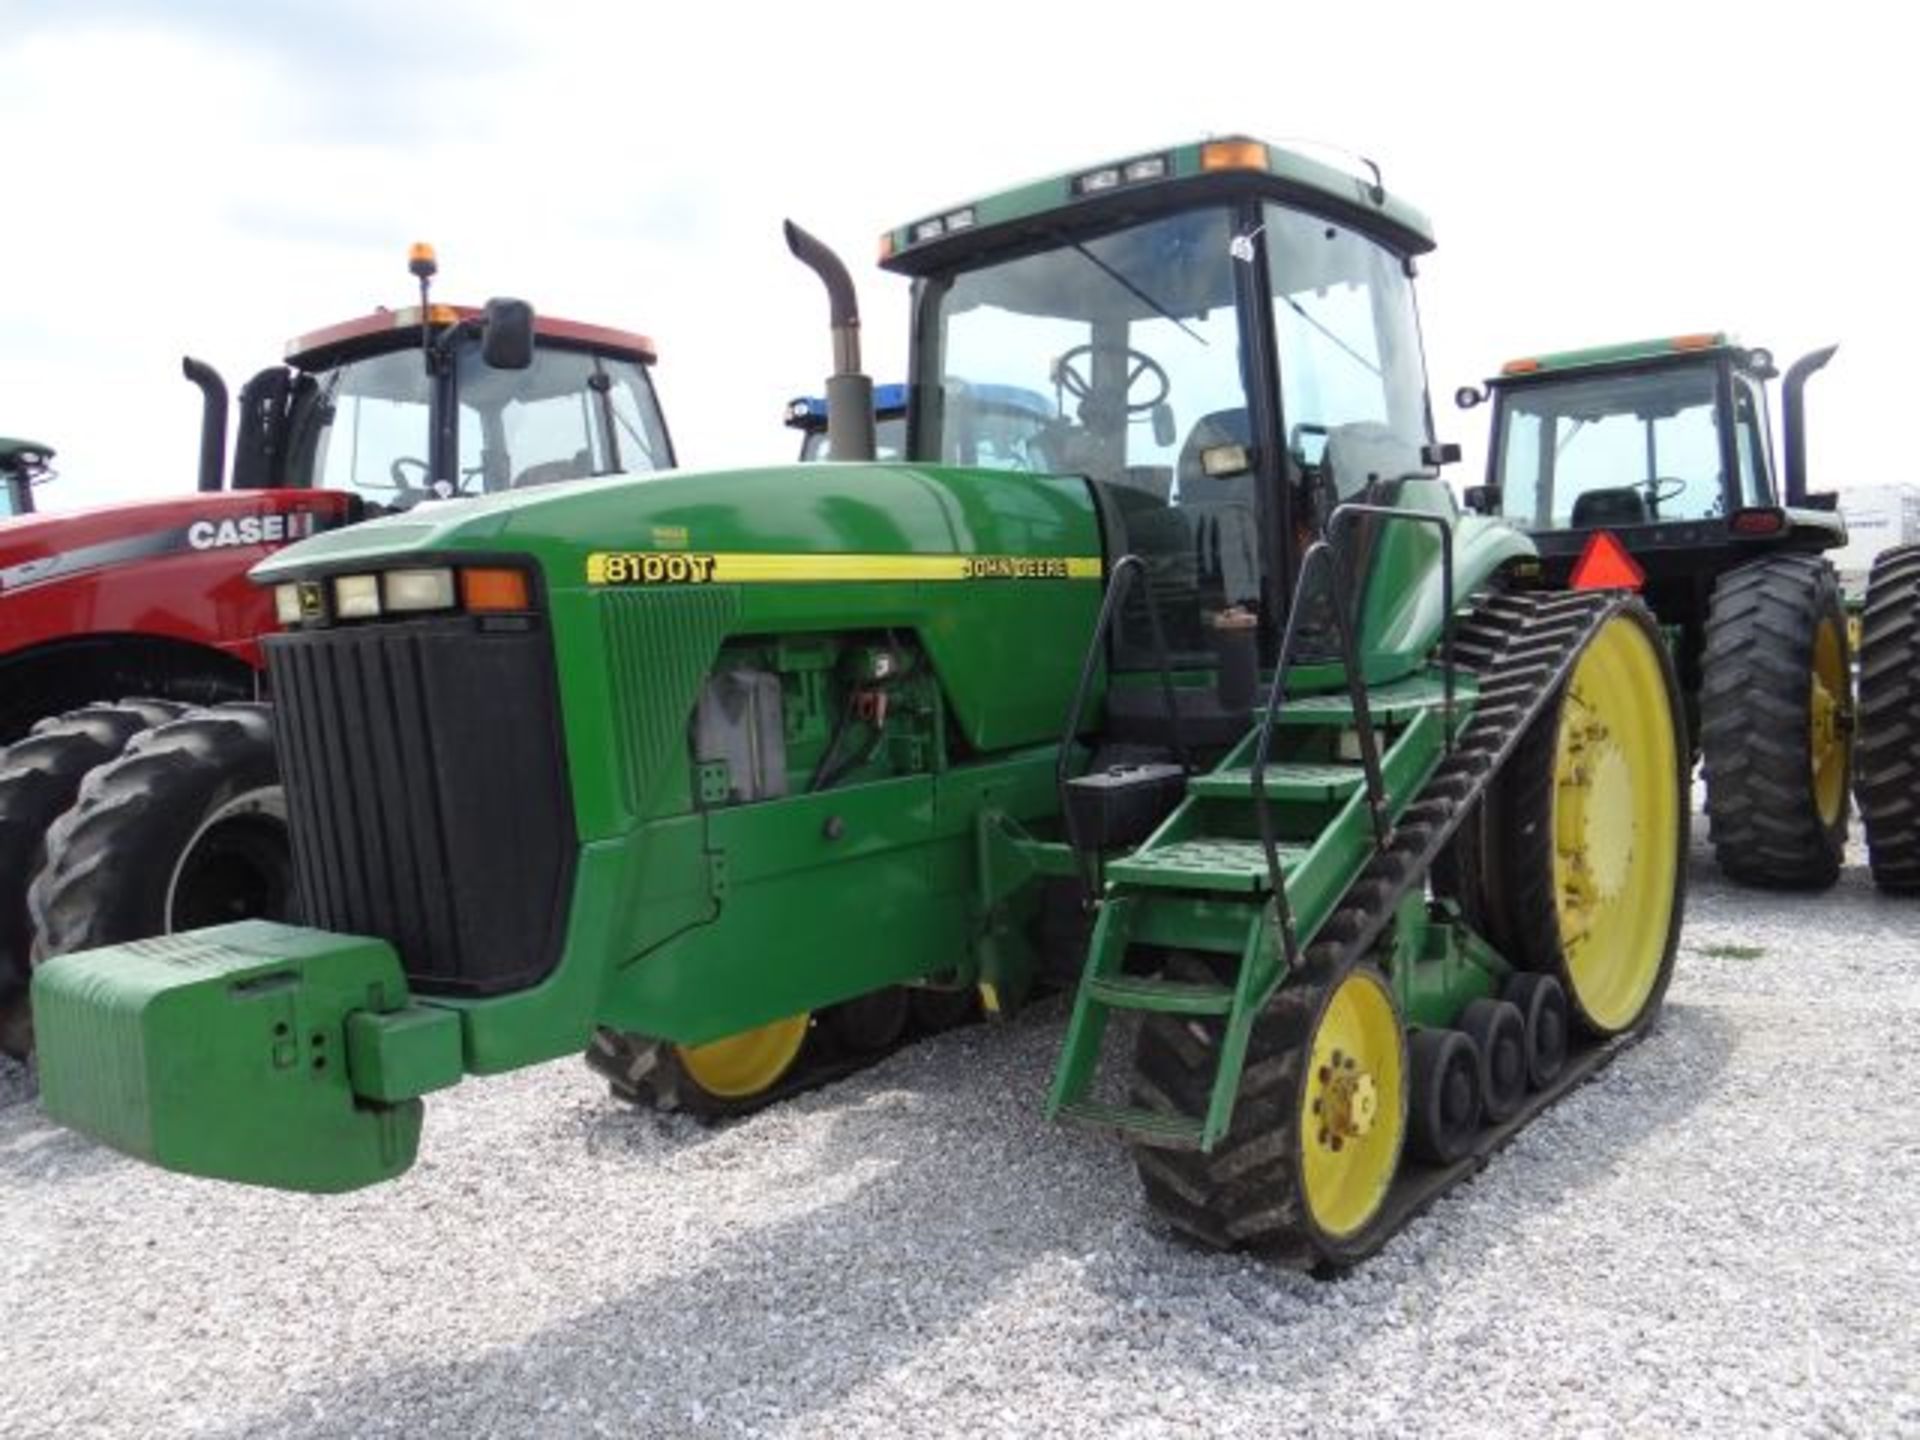 JD 8100T Tractor 4255 hrs, New Tracks, Very Good Shape